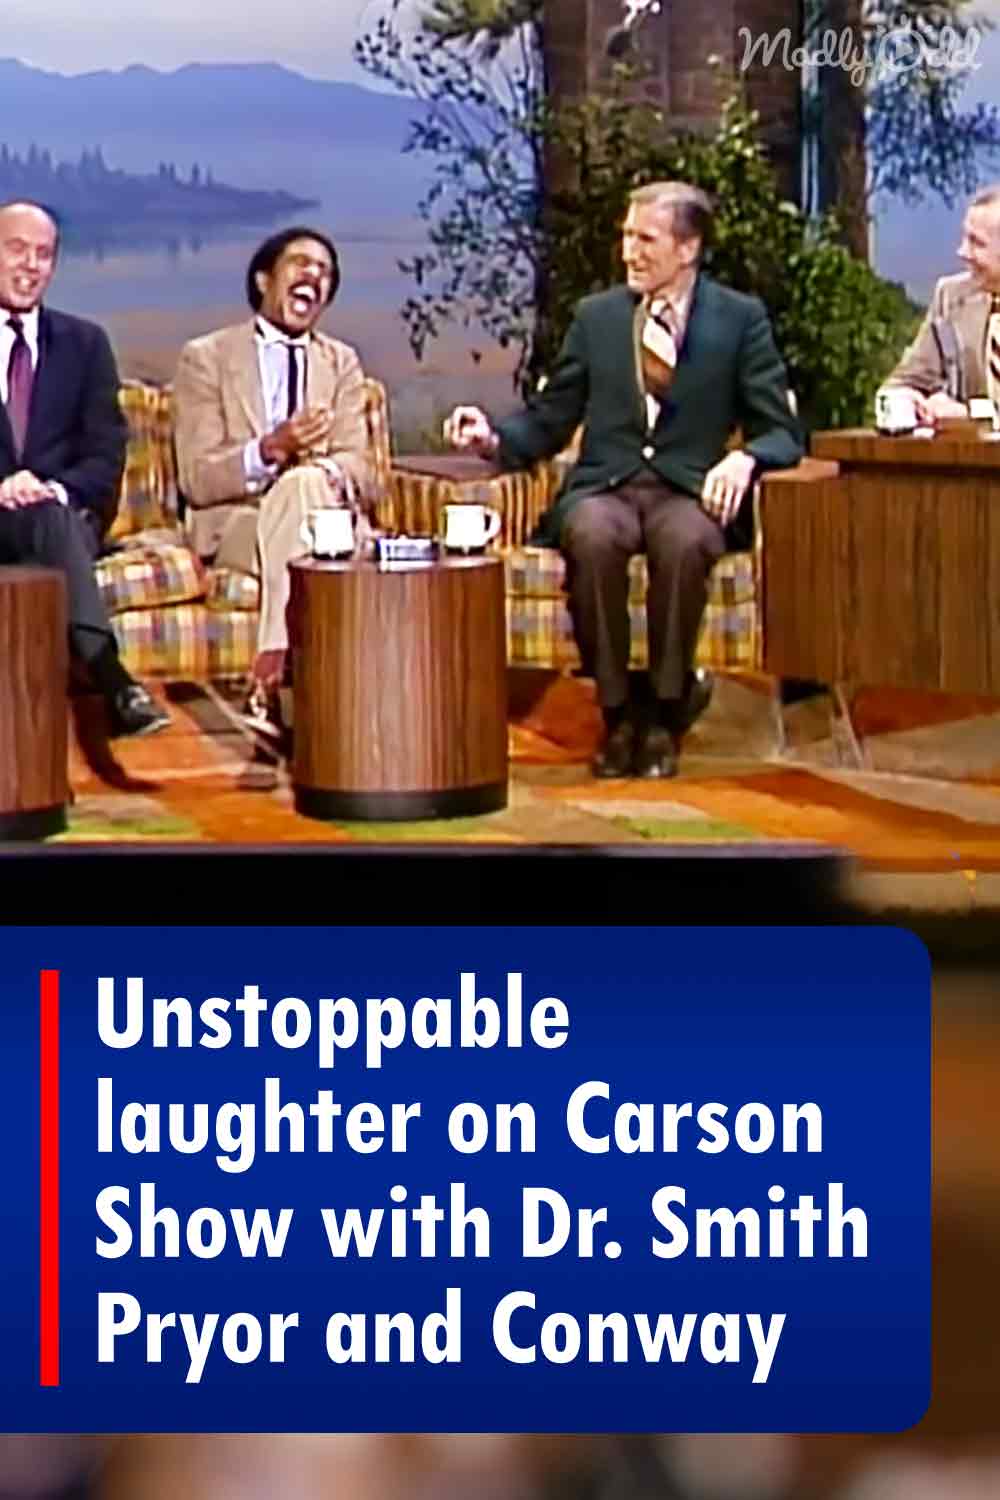 Unstoppable laughter on Carson Show with Dr. Smith Pryor and Conway